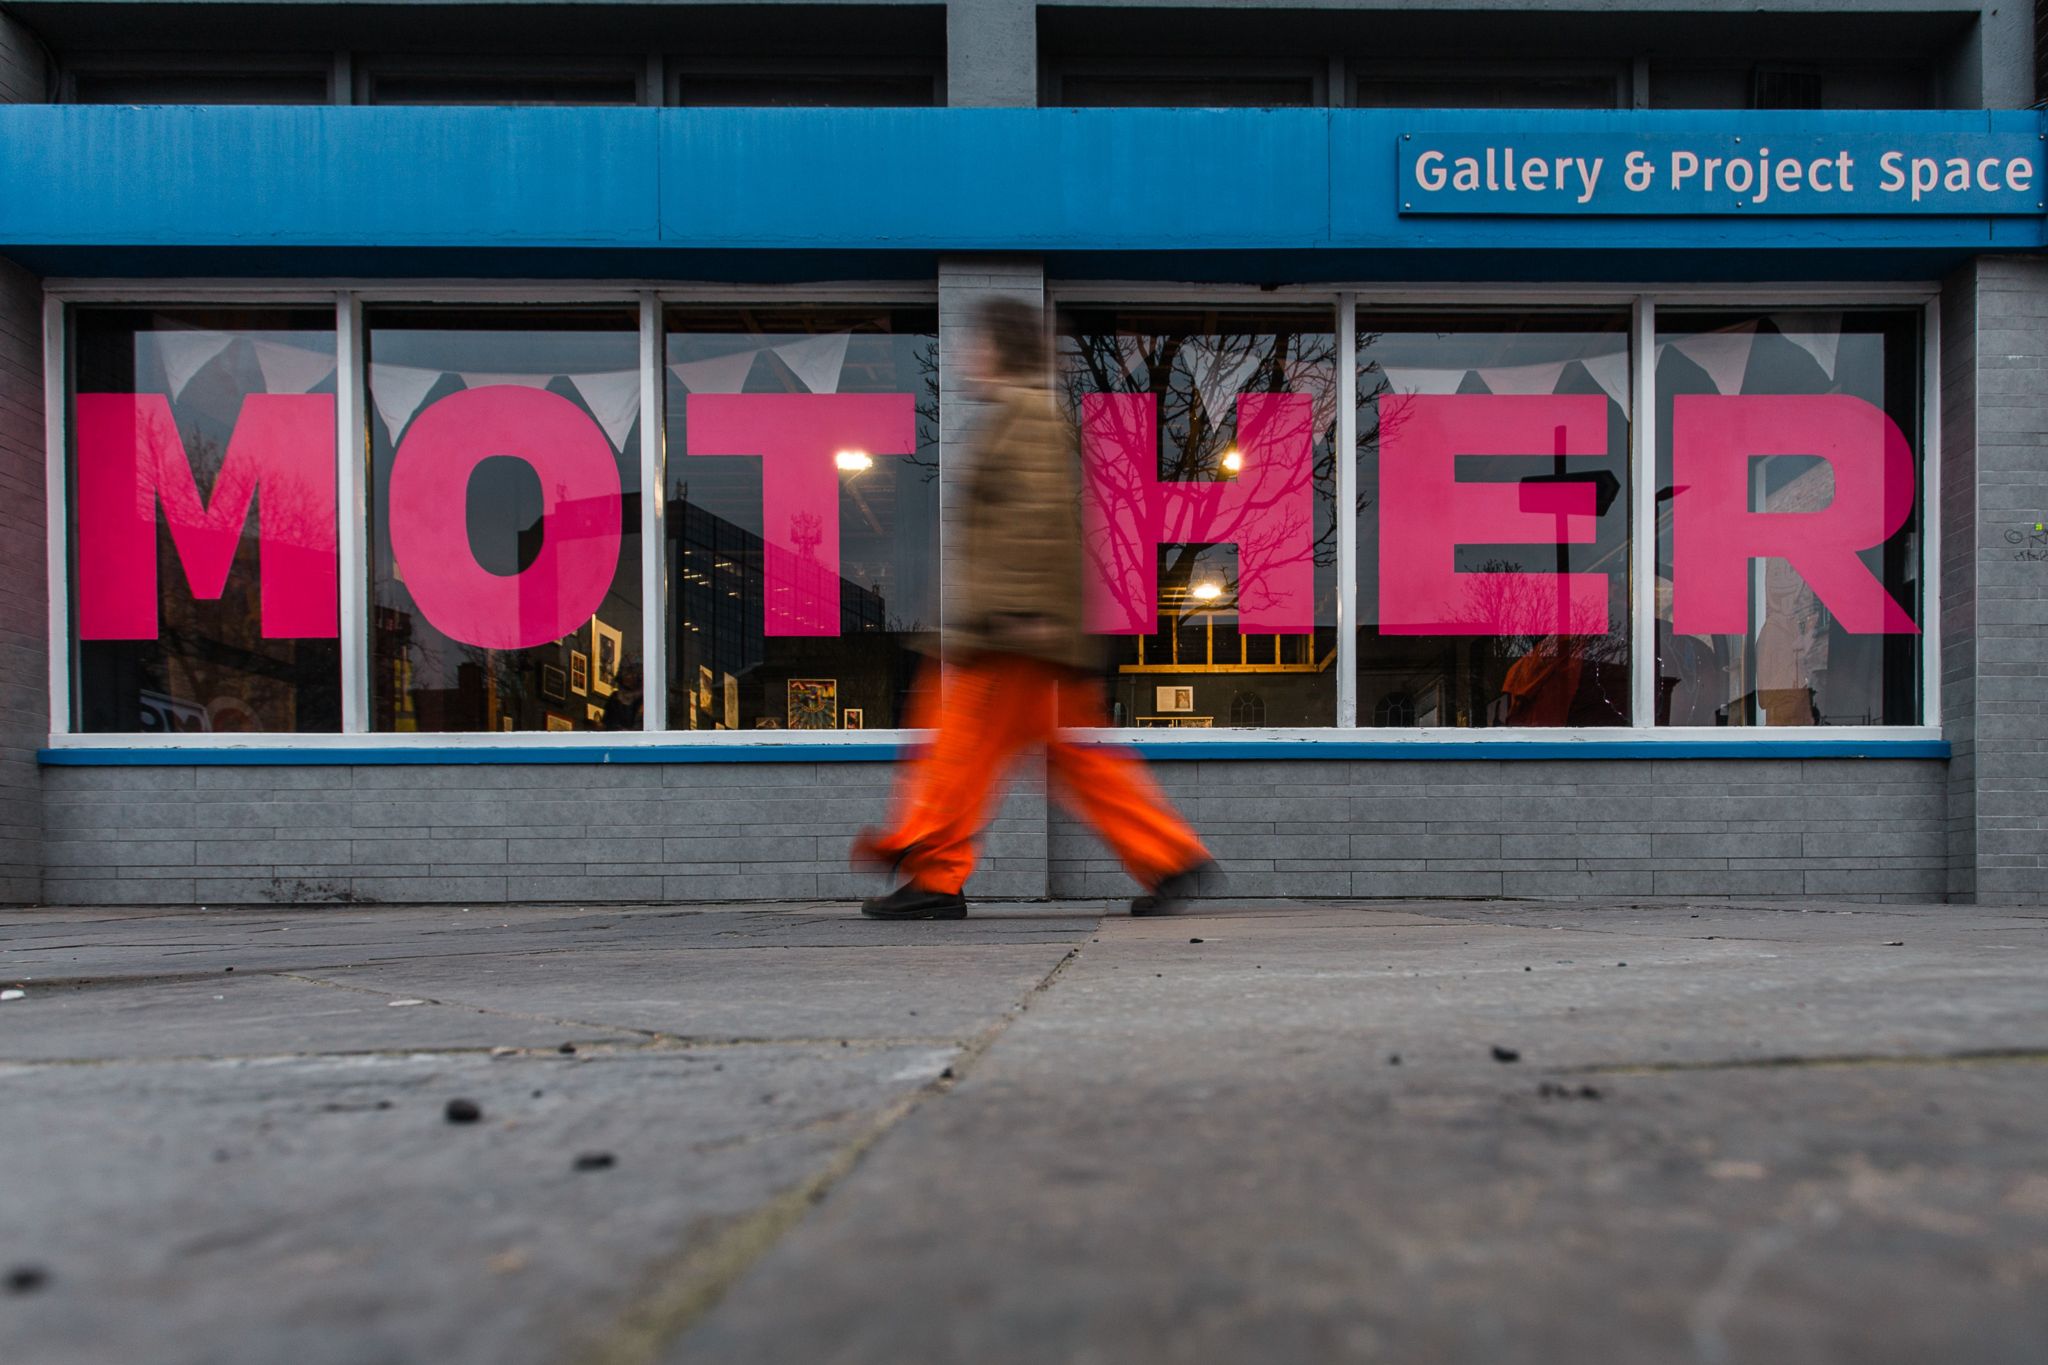 blurred figure walking past a sign saying "mother" in the windows of an exhibition space